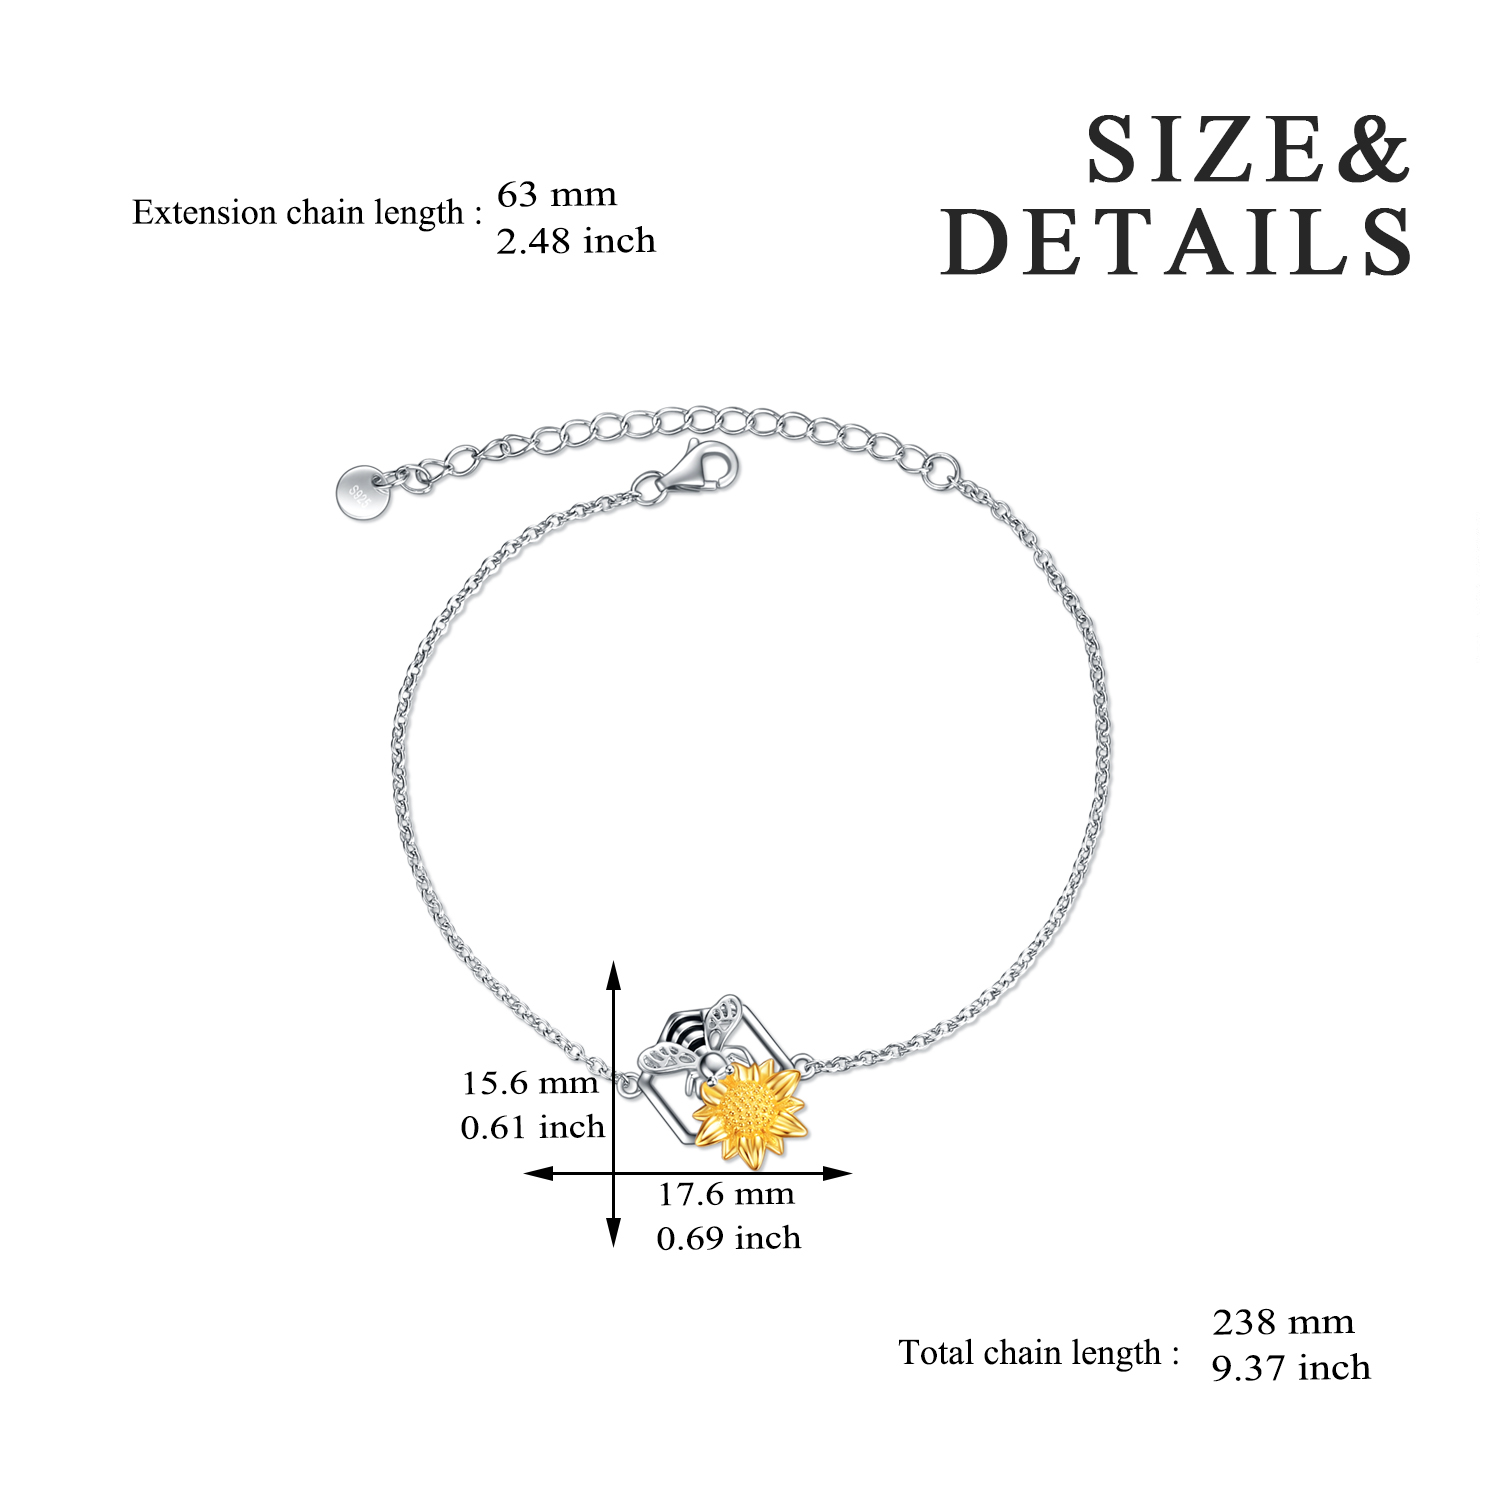 Sunflower Bee Bracelet Sterling Silver Honey Bumble Bee Flower Jewelry Gifts for Women Birthday